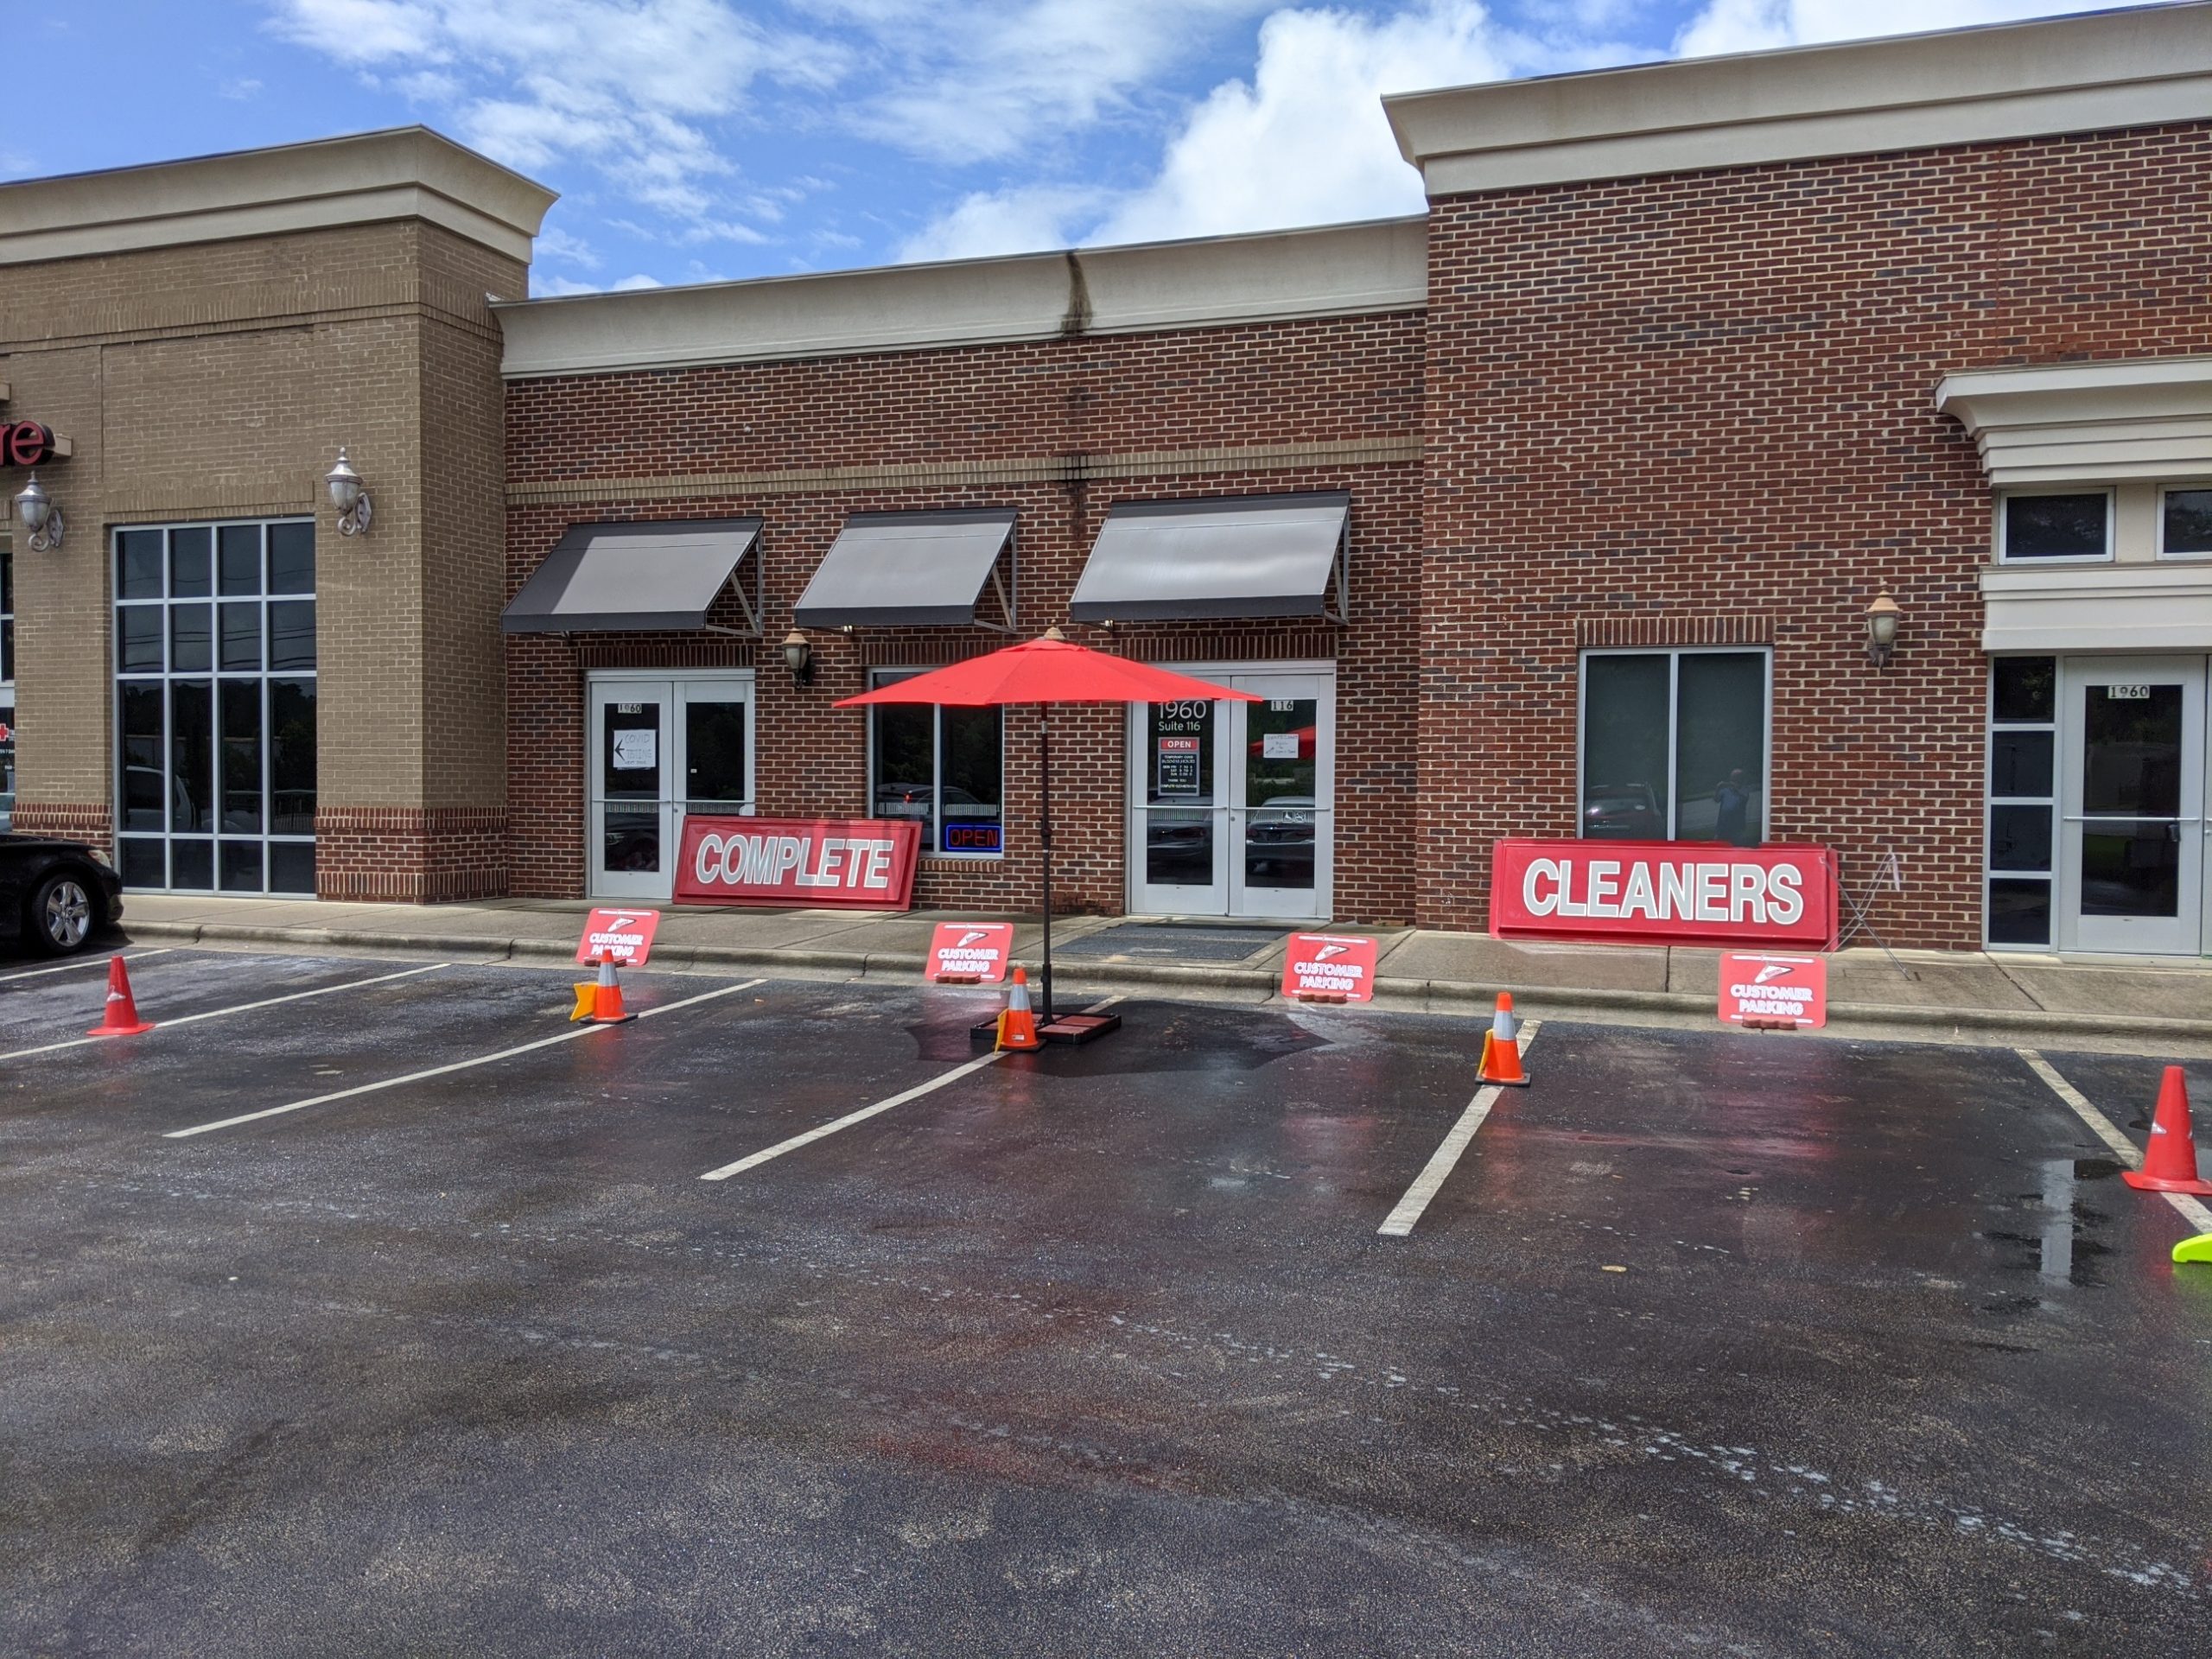 Complete Cleaners makes adjustments following fire